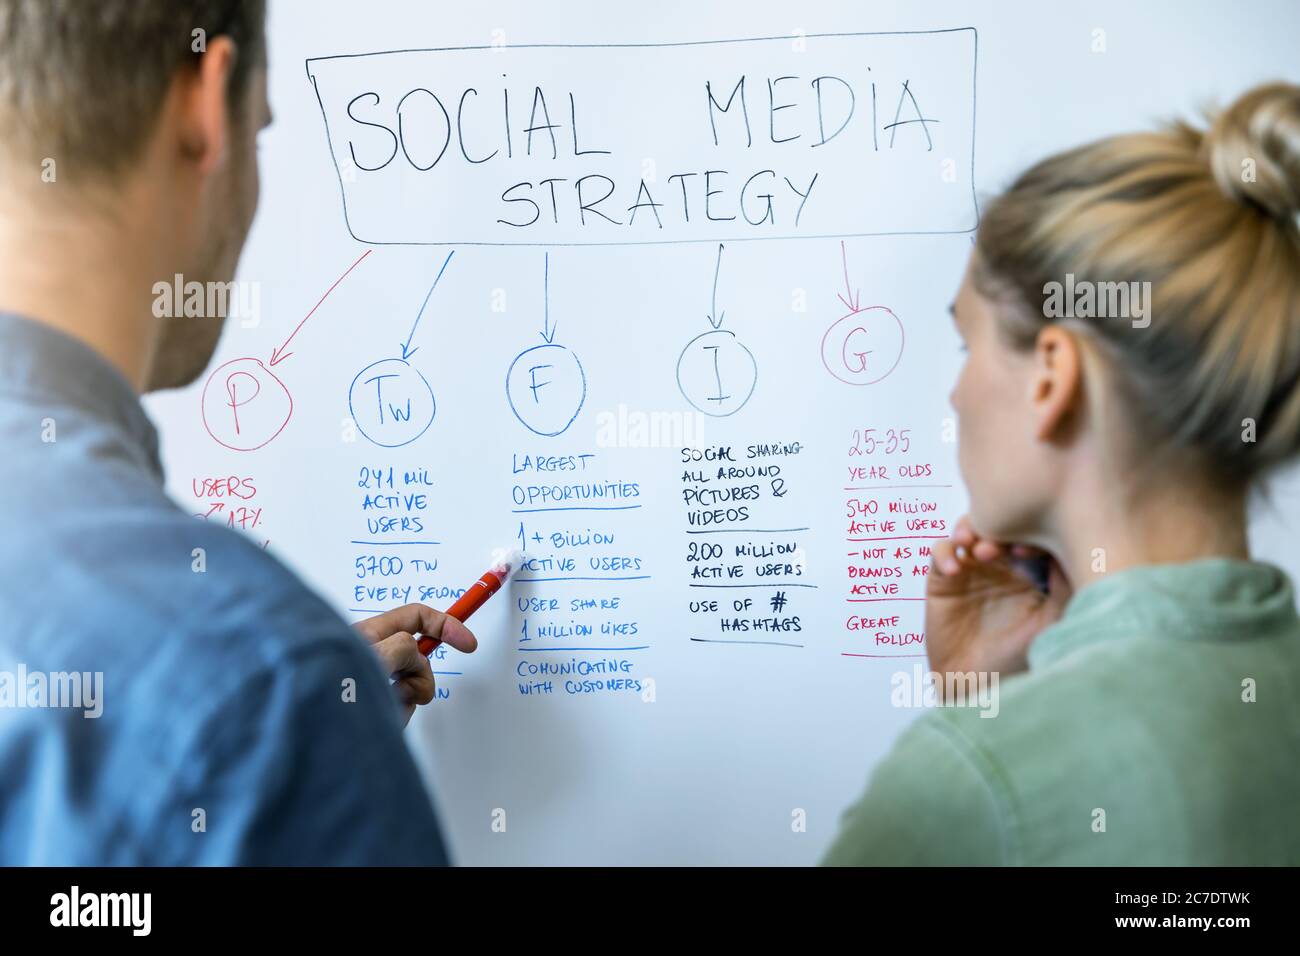 social media and influencer marketing concept - people discussing strategy plan on whiteboard in office Stock Photo